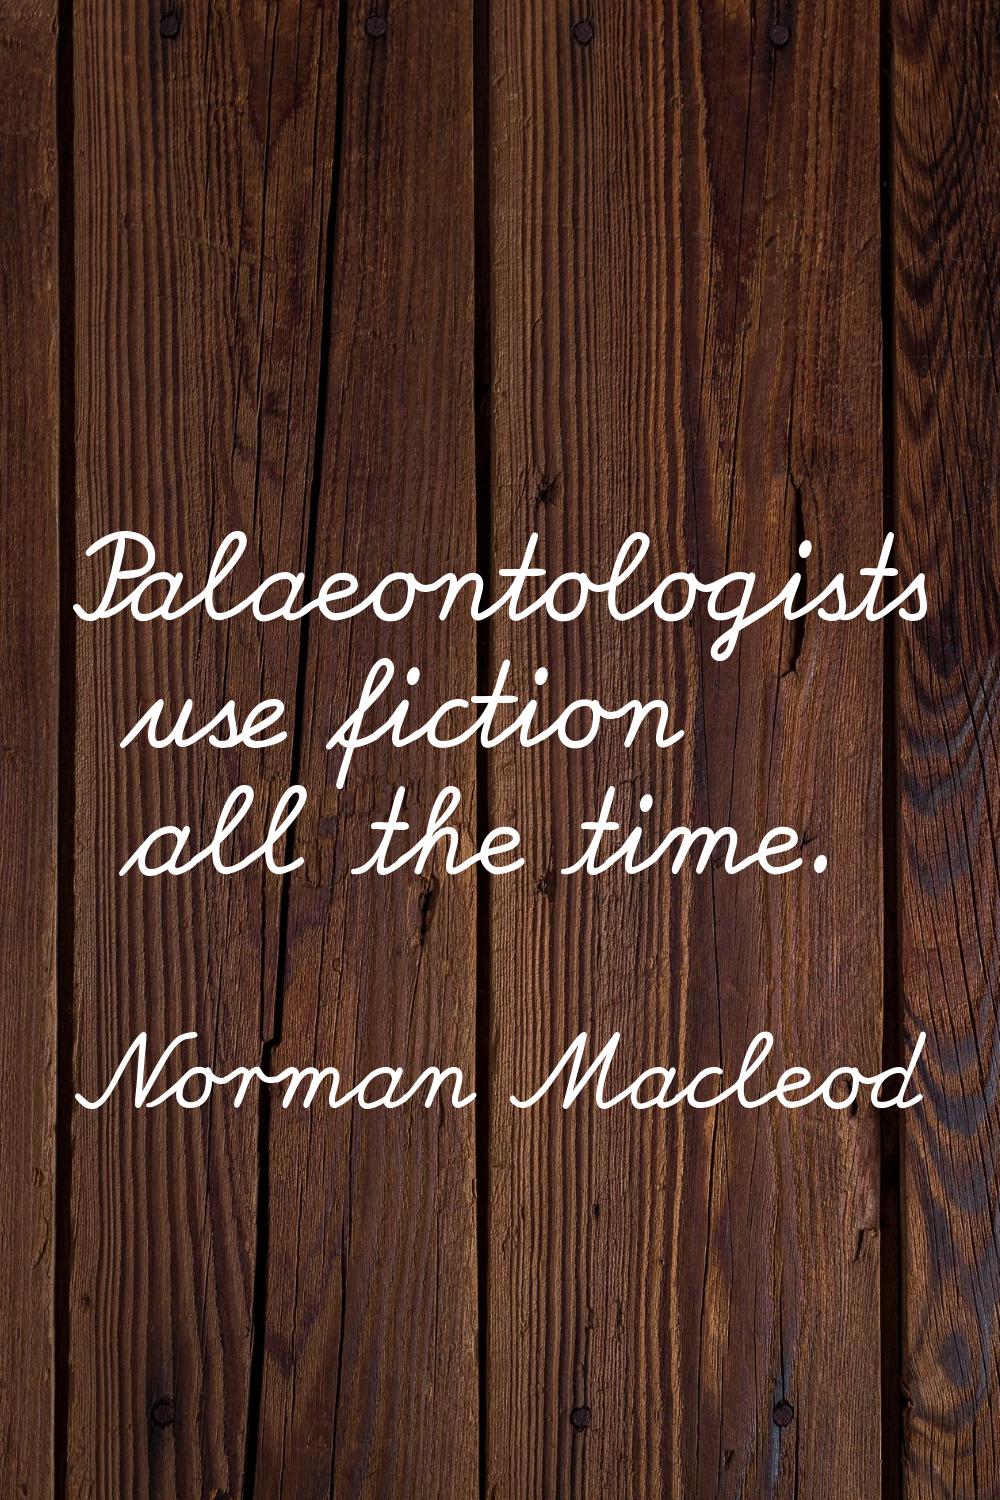 Palaeontologists use fiction all the time.